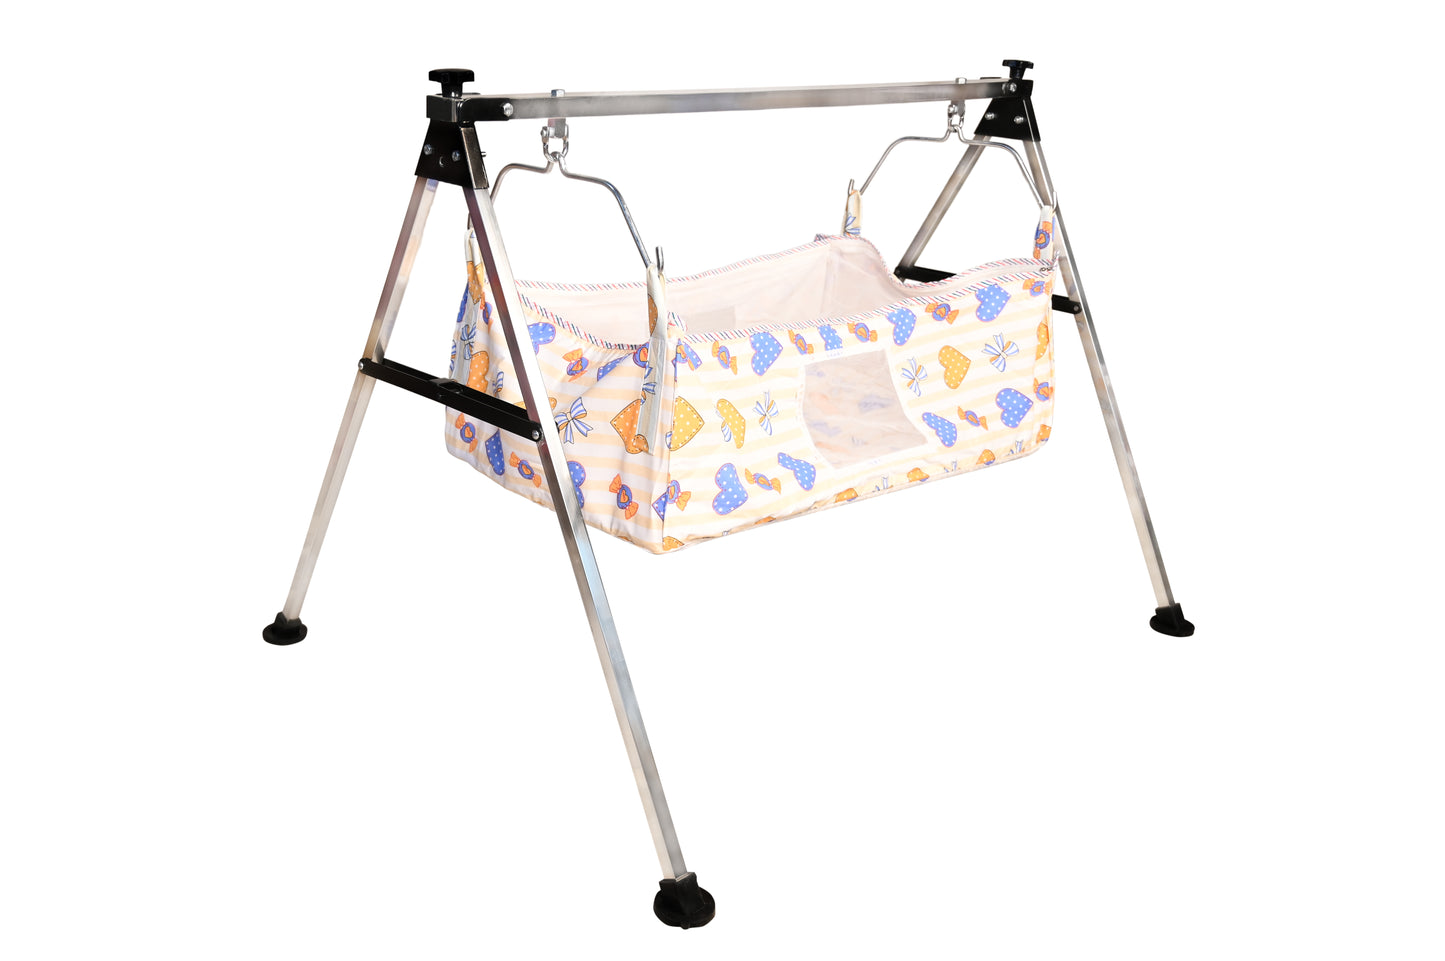 4 FOOT LIGHT WEIGHT SQUARE CRADLE KIT ( WEIGHT 5.5KG )